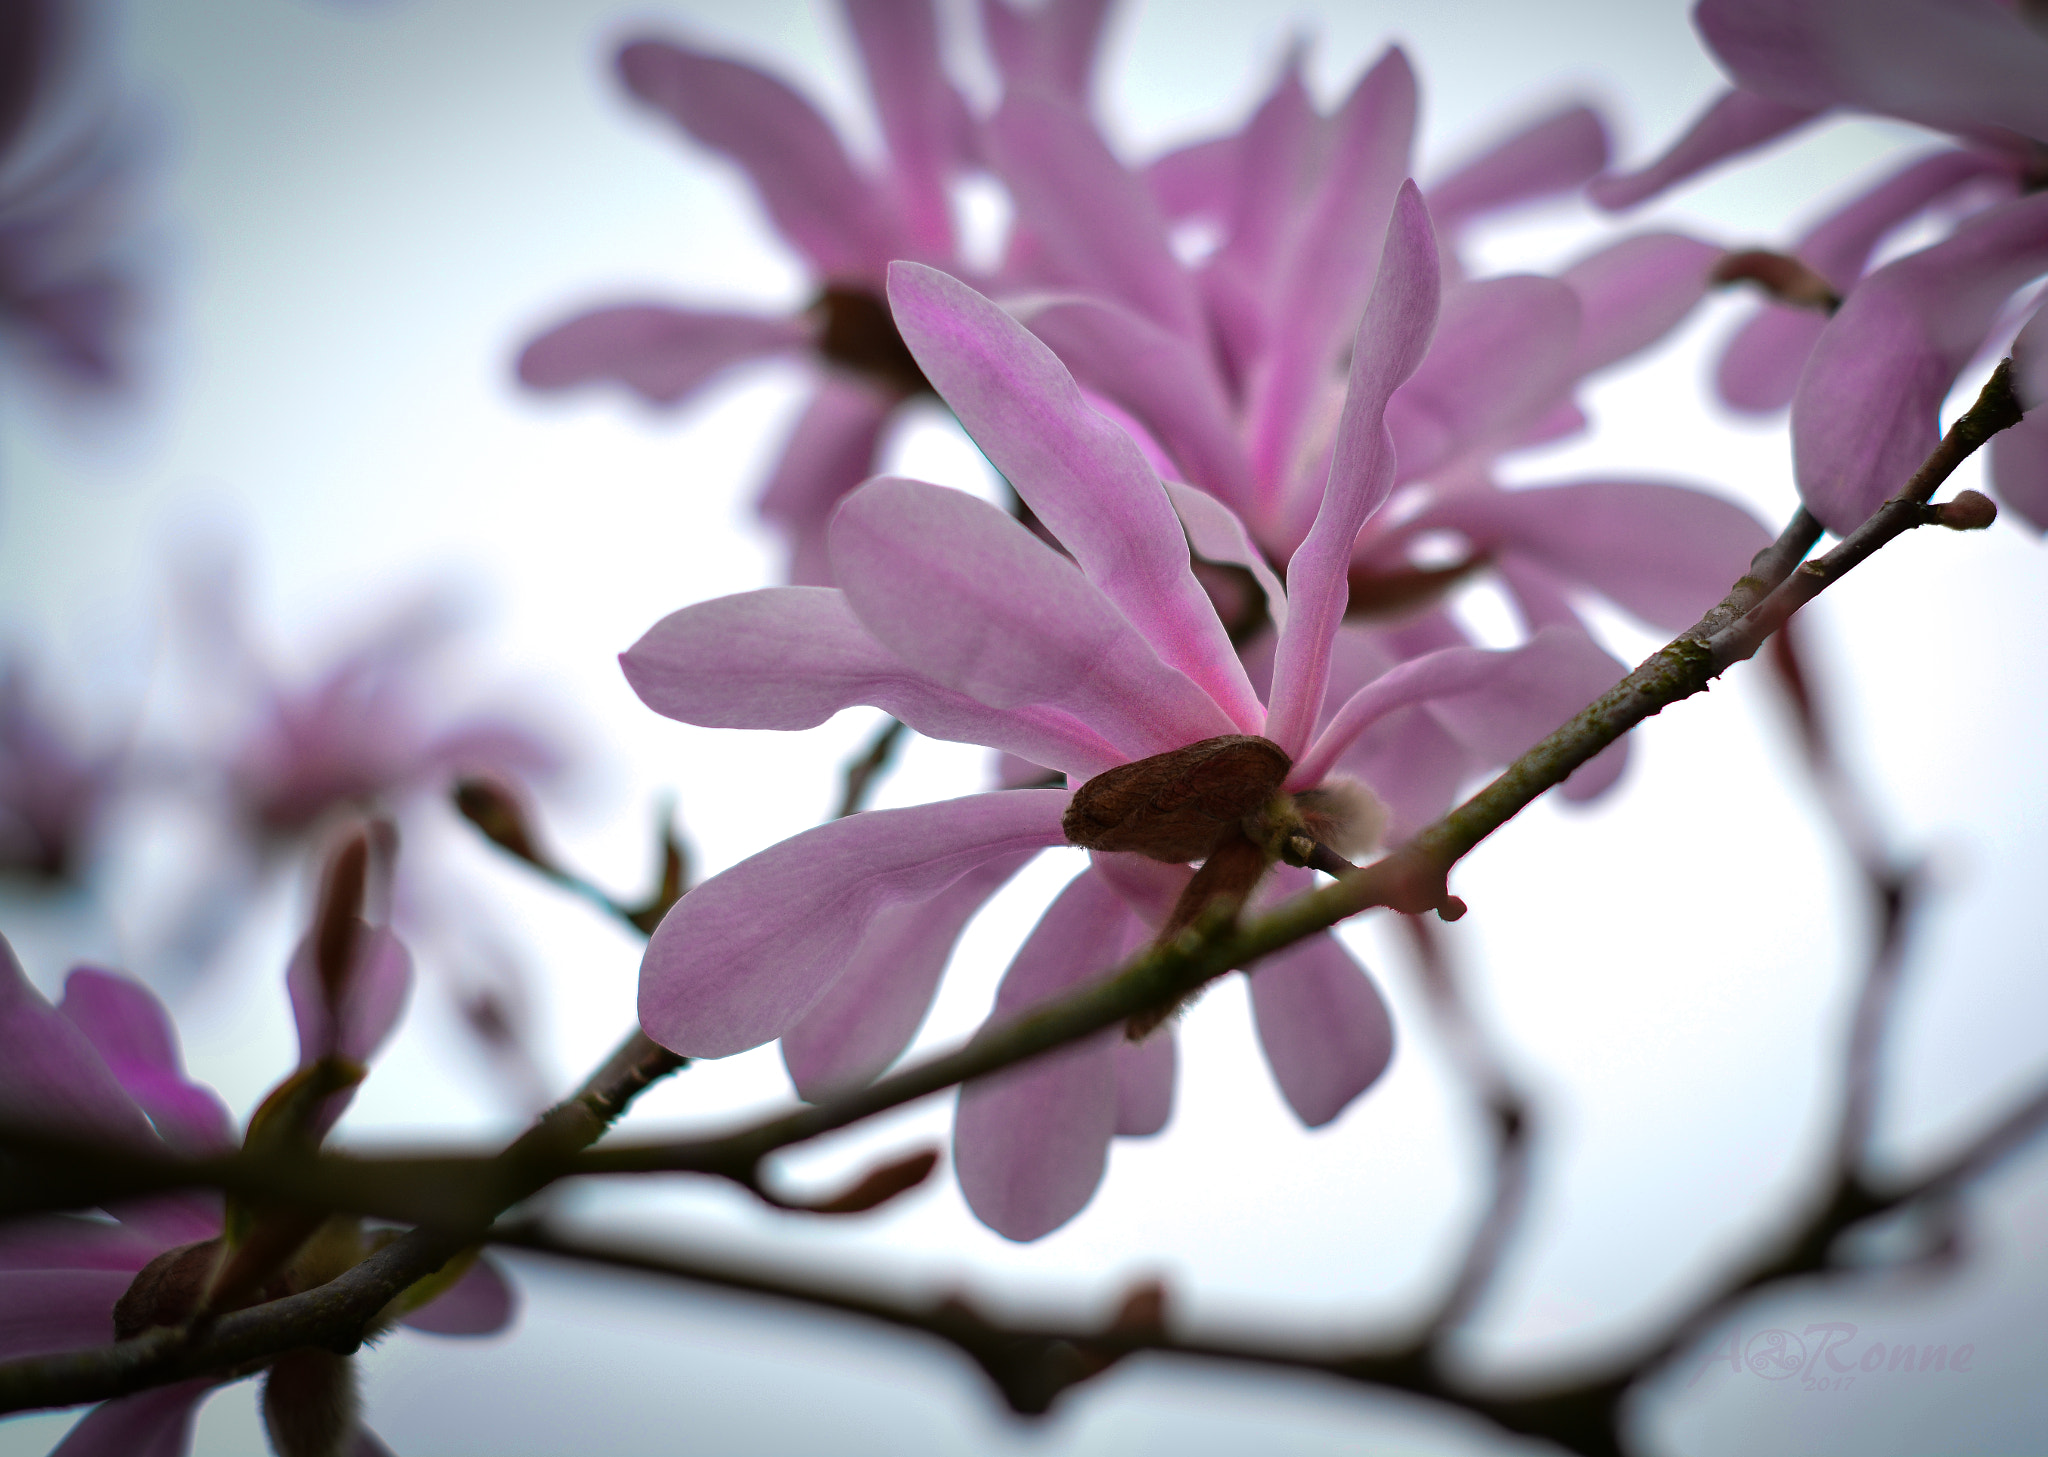 Nikon D5200 + AF-S DX VR Zoom-Nikkor 18-55mm f/3.5-5.6G + 2.8x sample photo. The colors of spring... photography